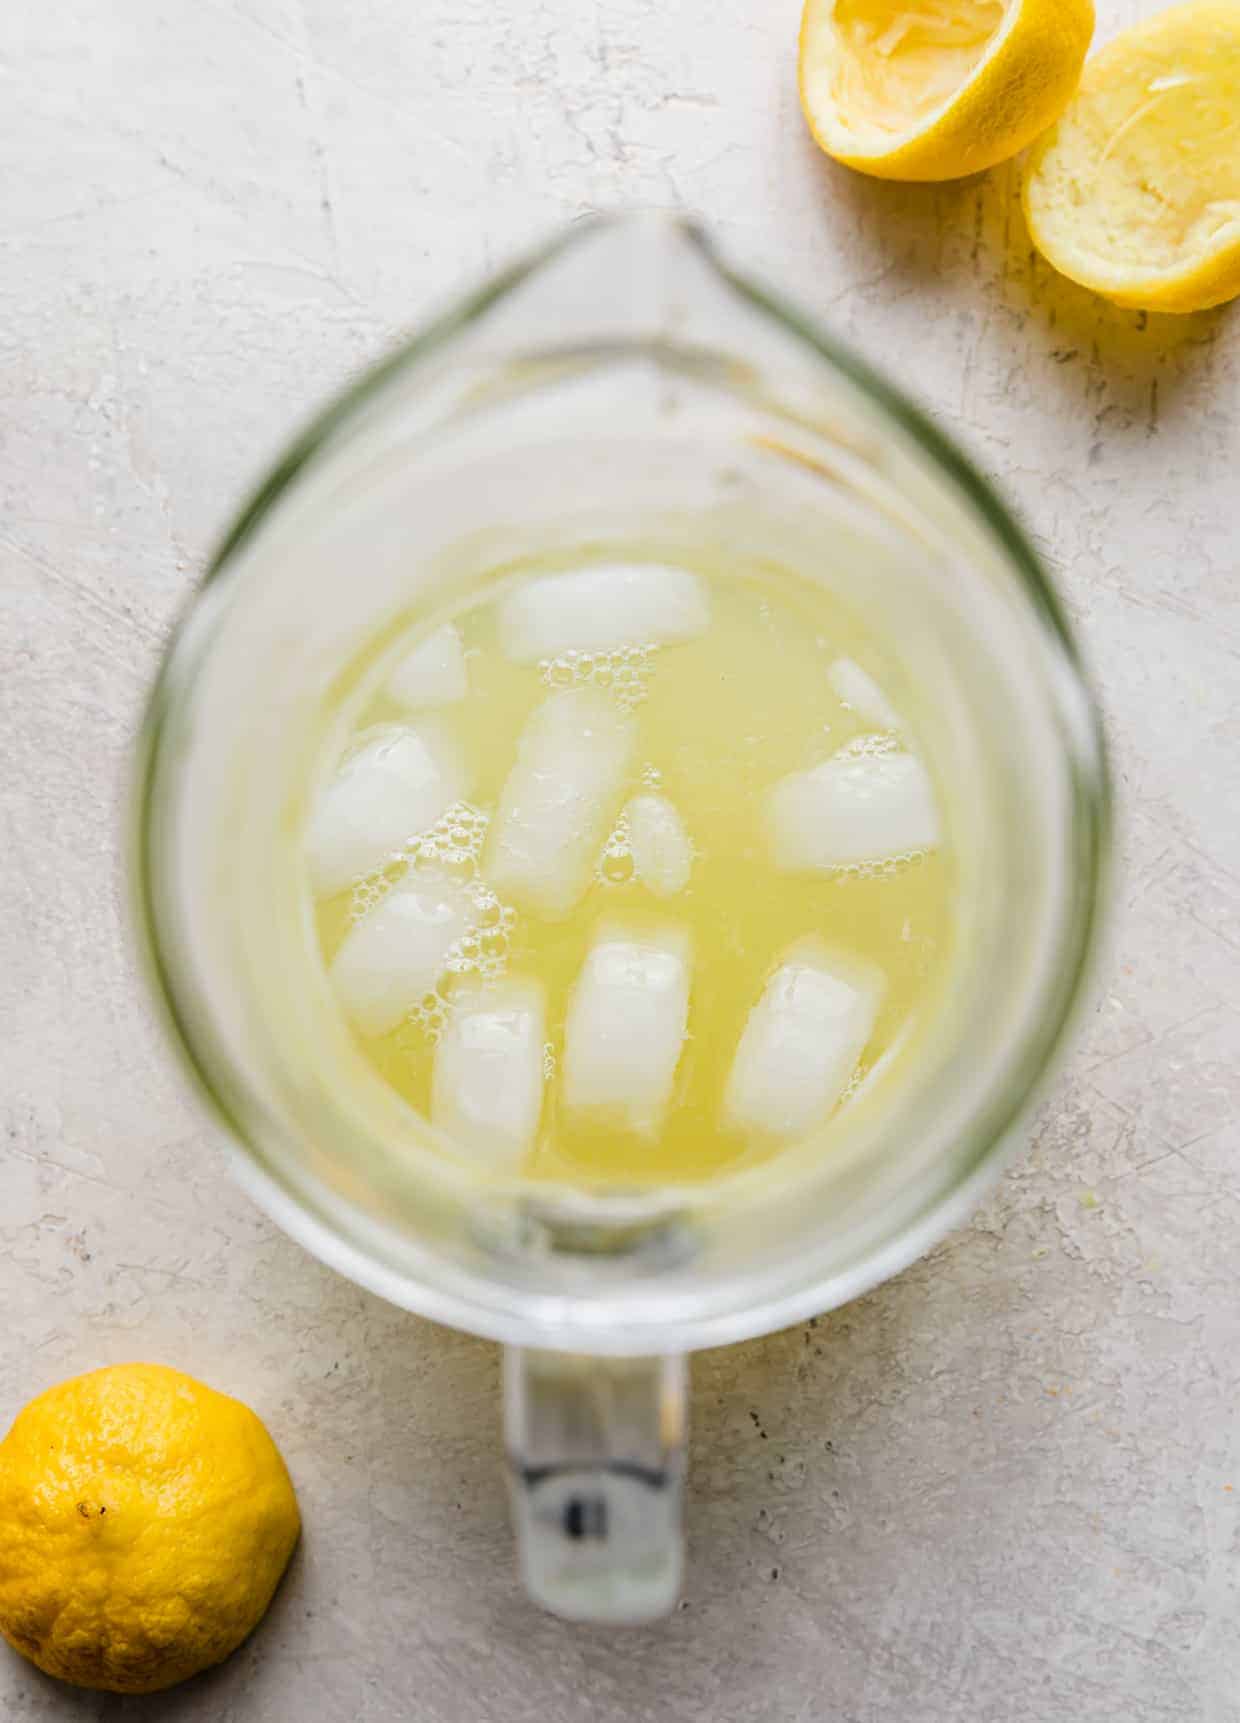 Overhead photo of lemon juice and ice in a glass pitcher.